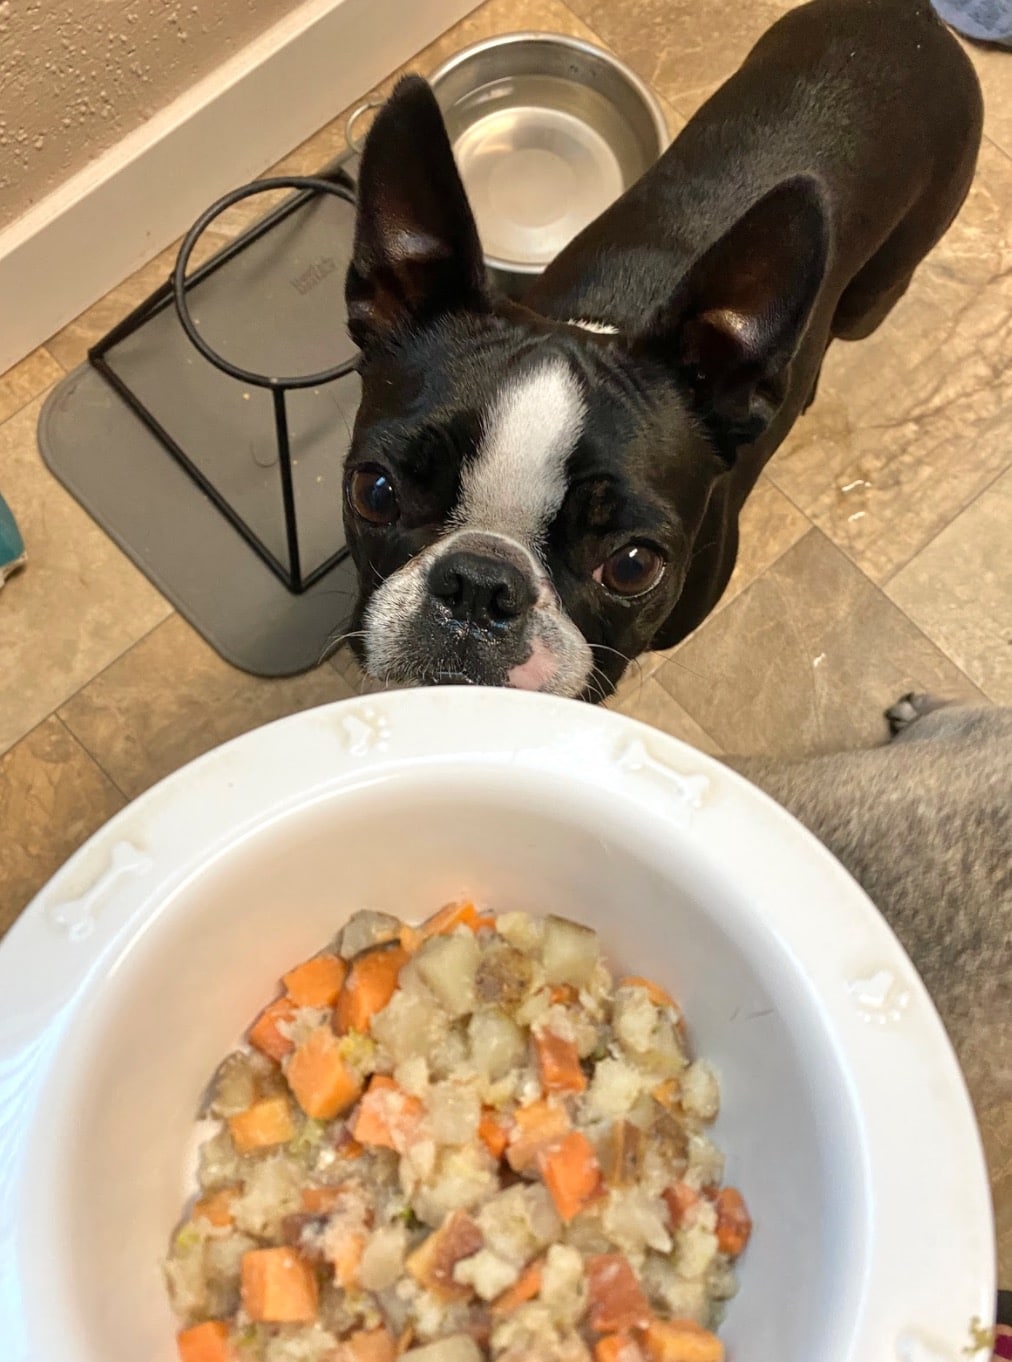 Boston Terrier awaiting her meal of Just Food for Dogs fresh dog food